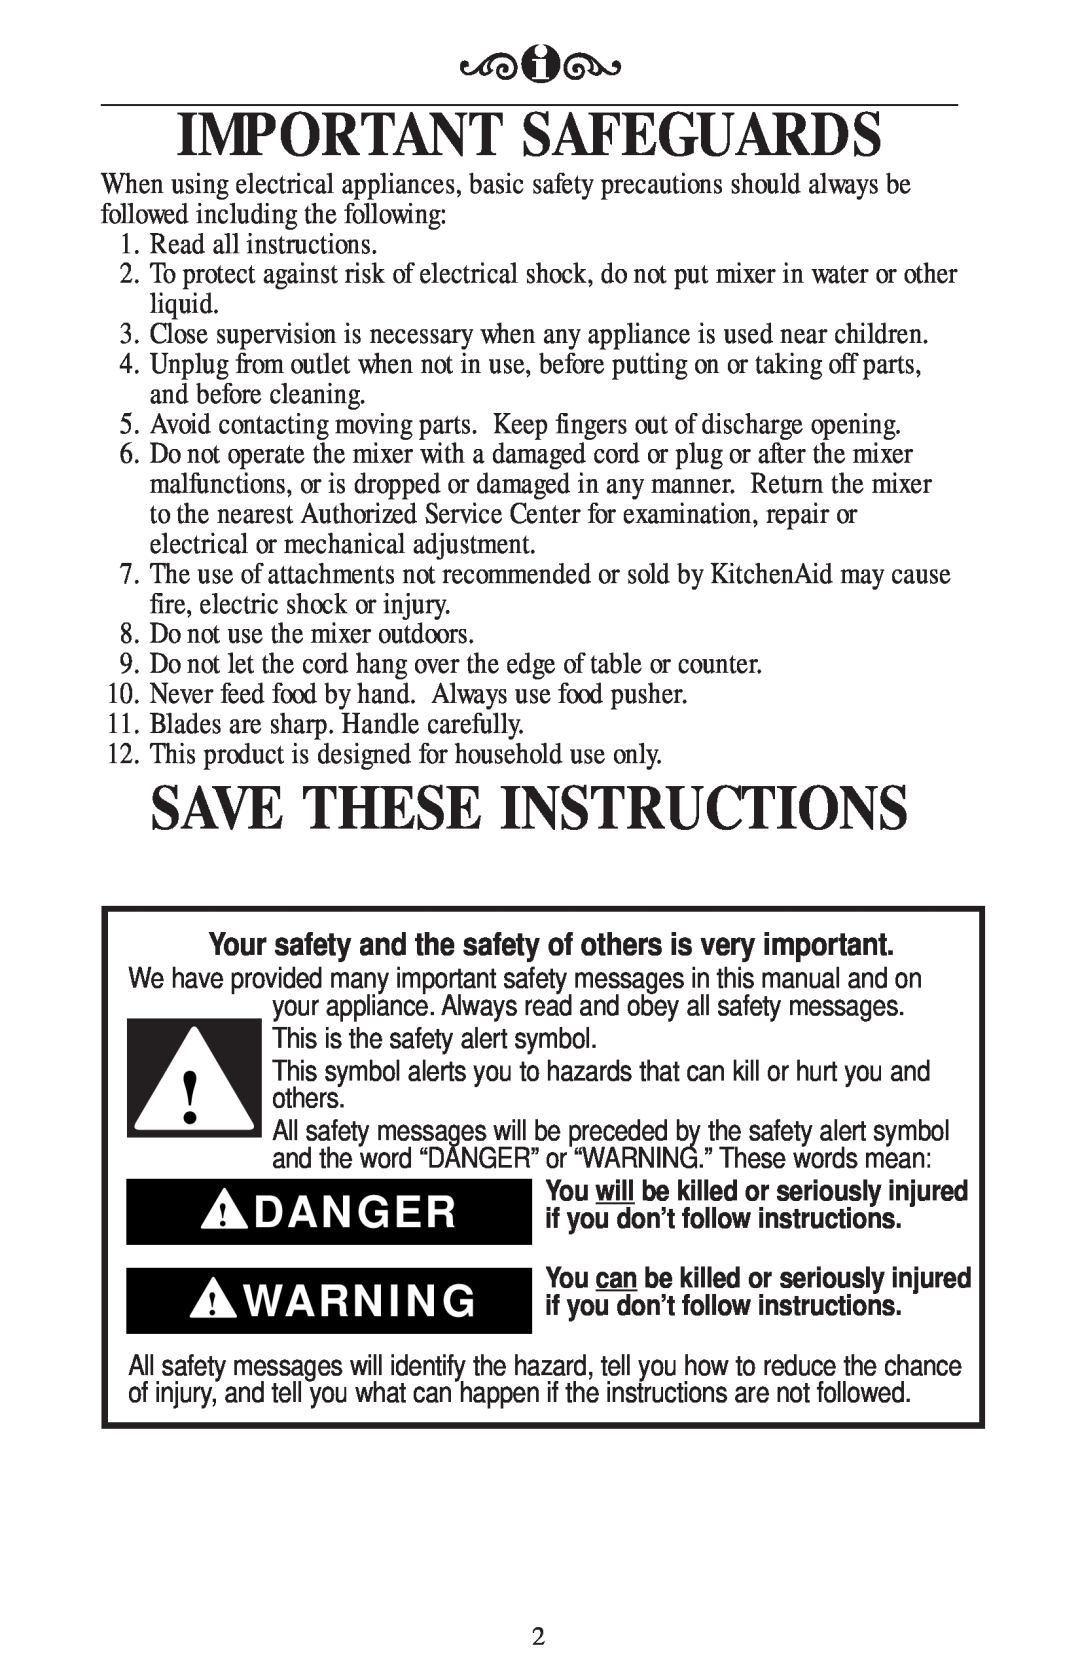 KitchenAid RVSA, 221 manual Important Safeguards, Save These Instructions, Danger 